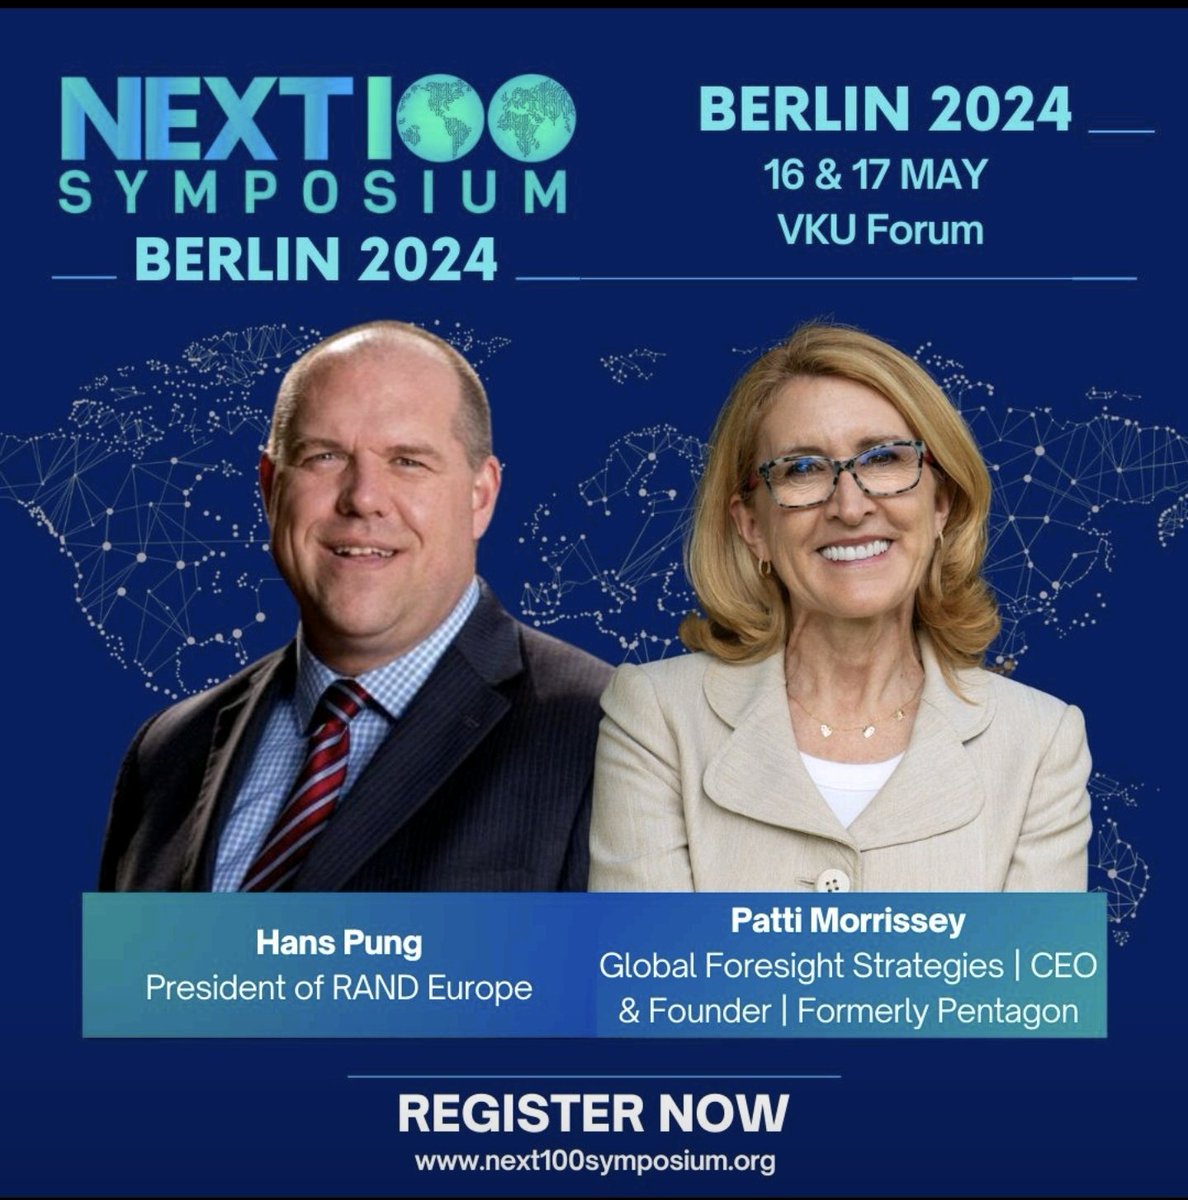 Inside scoop: following the thorough preparation of Patti's input,there is truly lot to look forward to 🤫 And the spotlight title by Hans Pung Experts on Trial: Navigating Data, Technology, and Mistrust in Public Conversations speaks for itself 🙂 #Next100symposium @RANDEurope